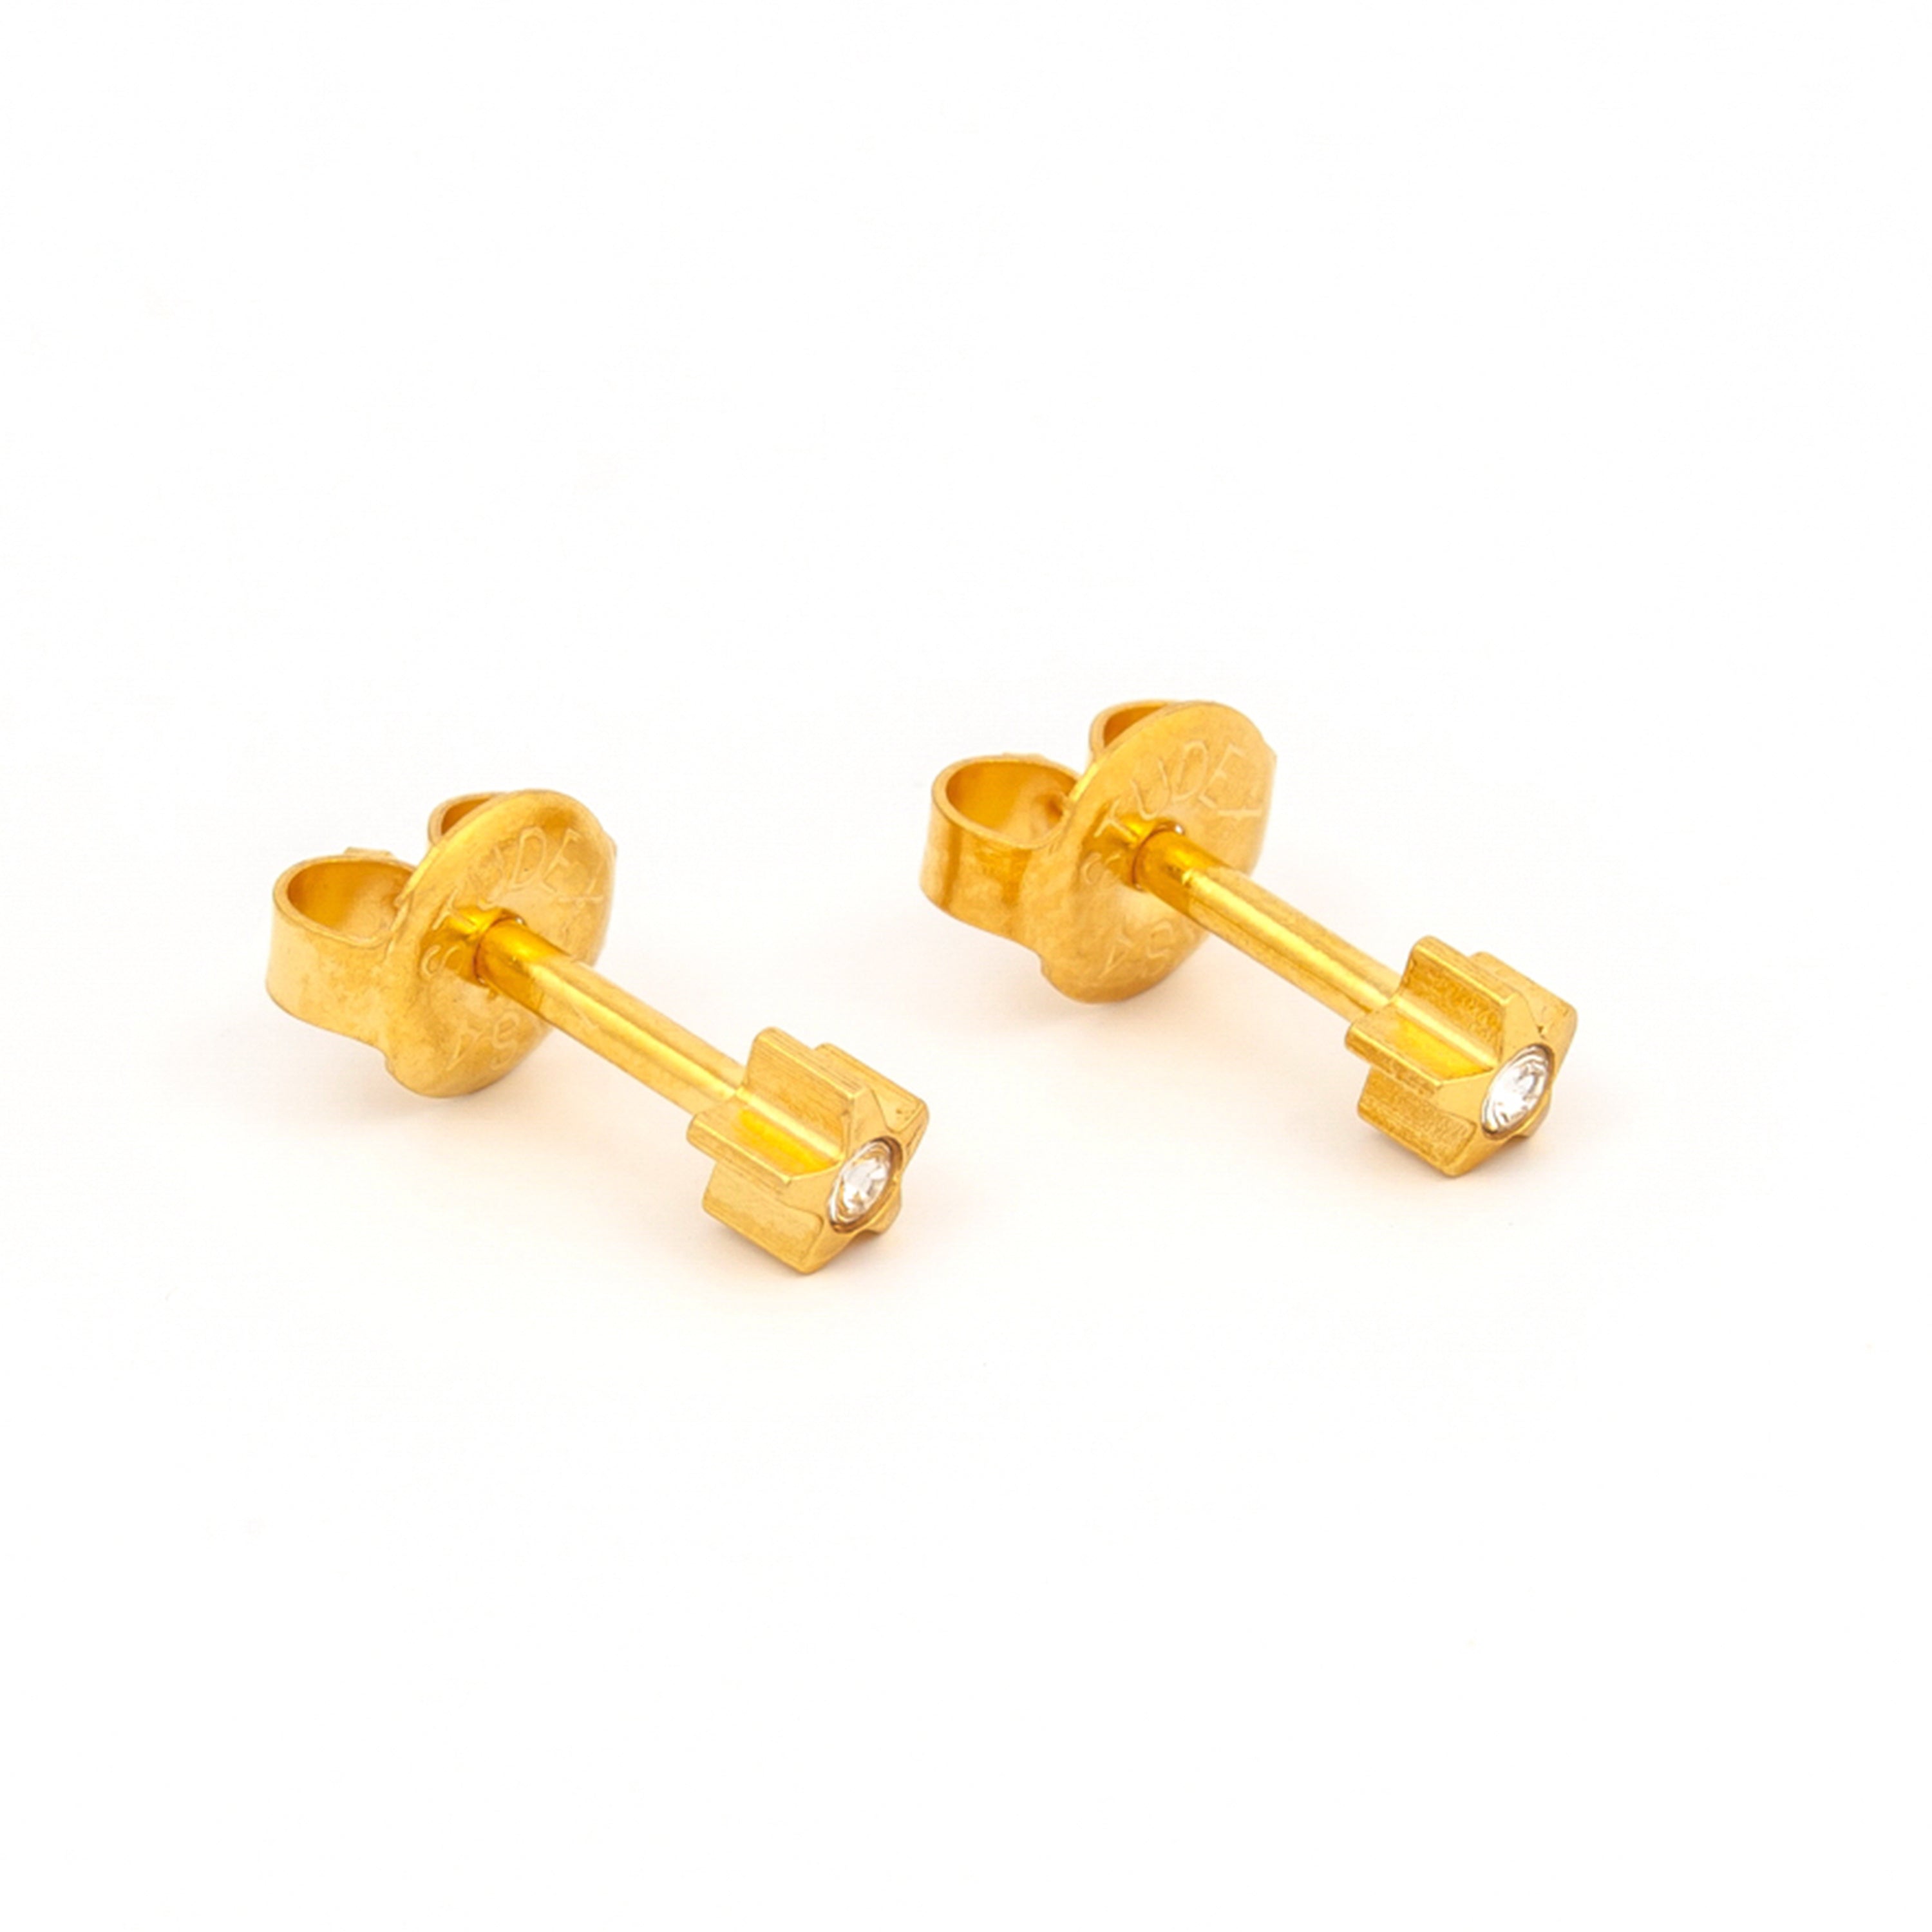 3MM STARLITE Studs 24K Pure Gold Plated Ear Studs | MADE IN USA | Ideal for everyday wear